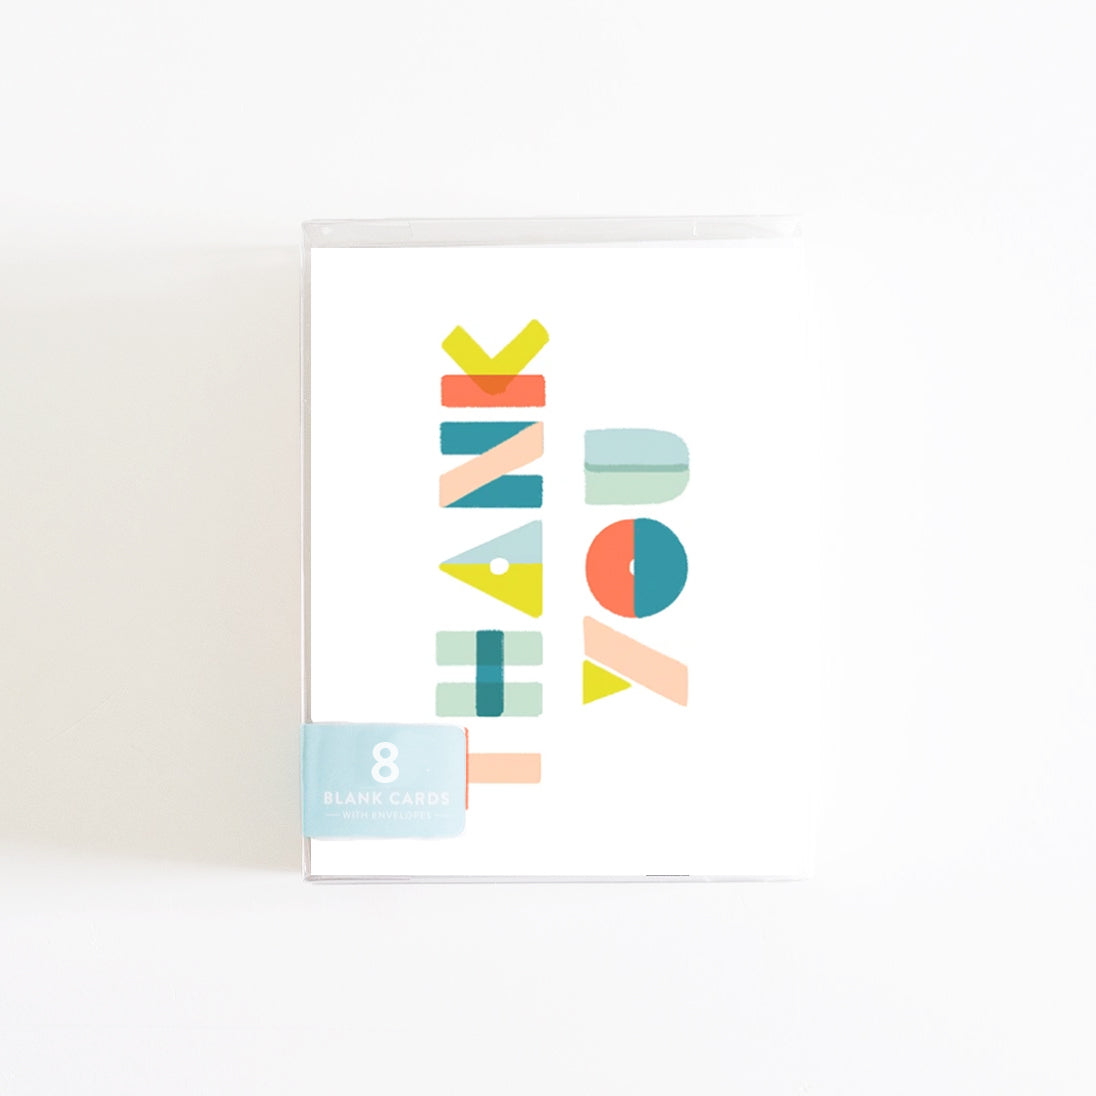 Thank You Shapes Boxed Set of 8 Cards